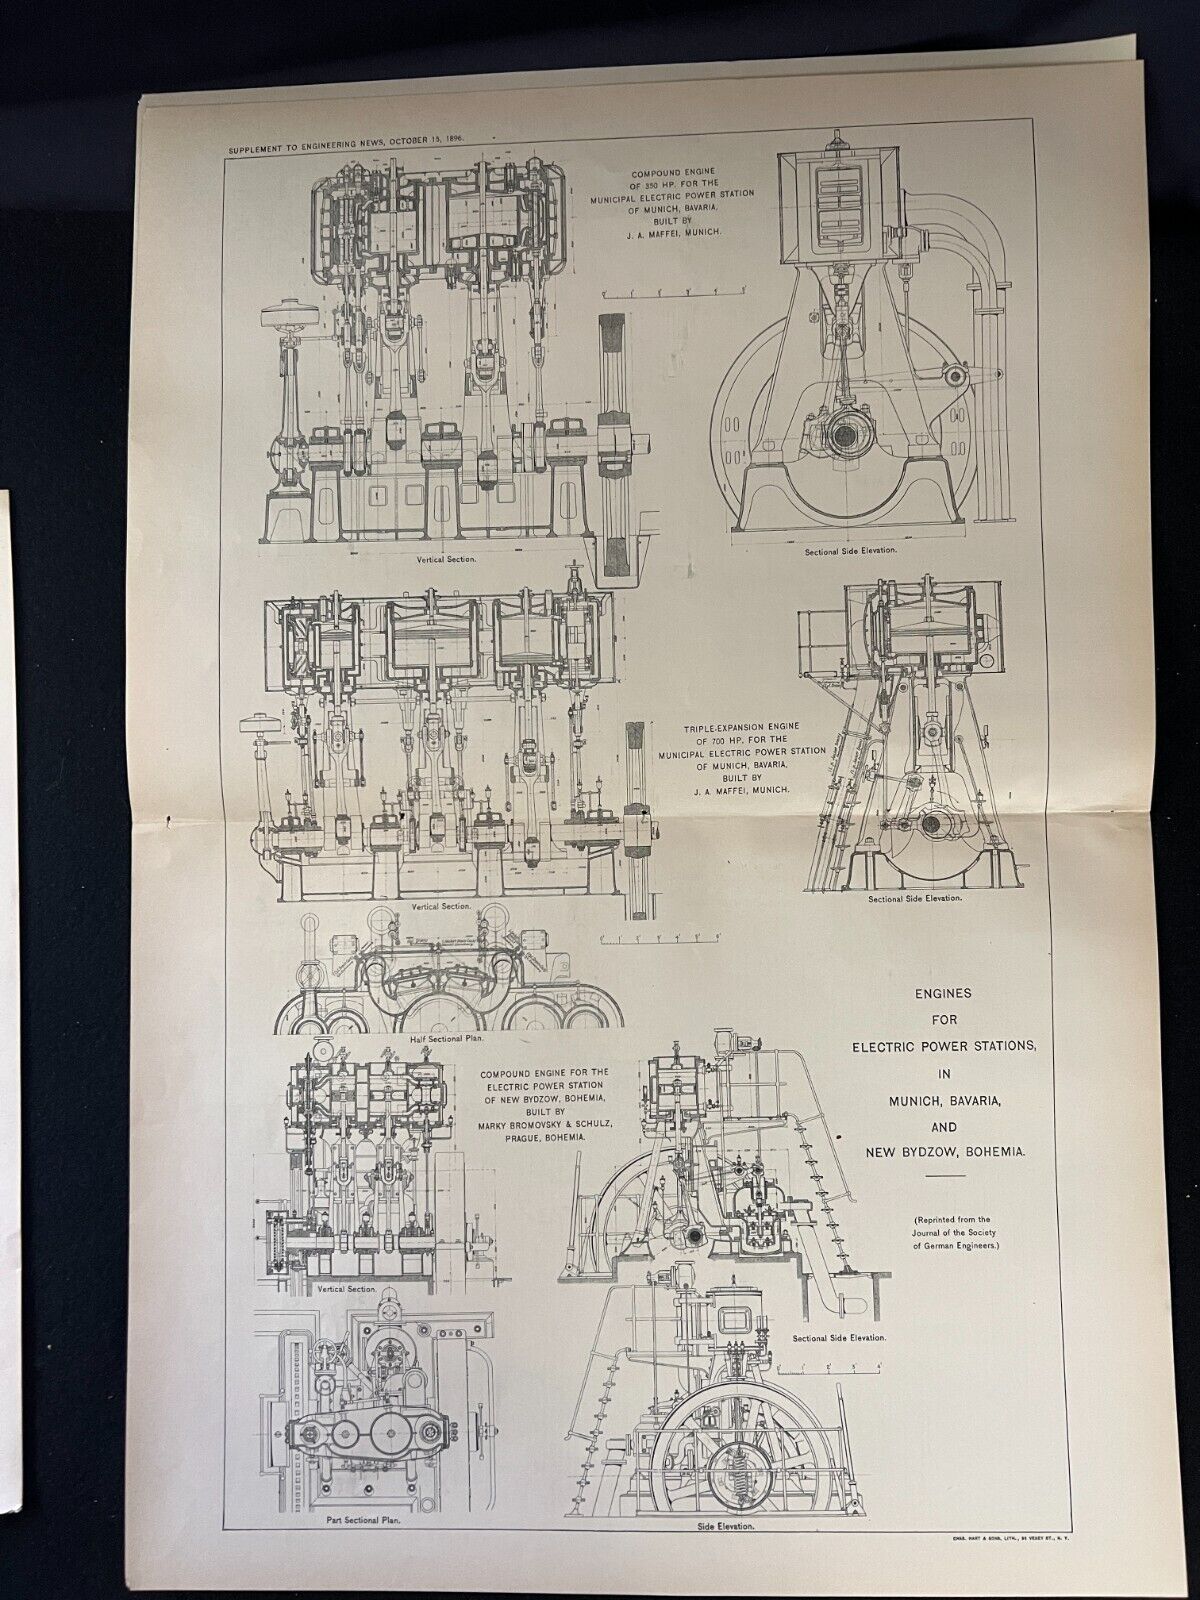 1896 Antique Industrial Drawing Engines for Electric Power Stations